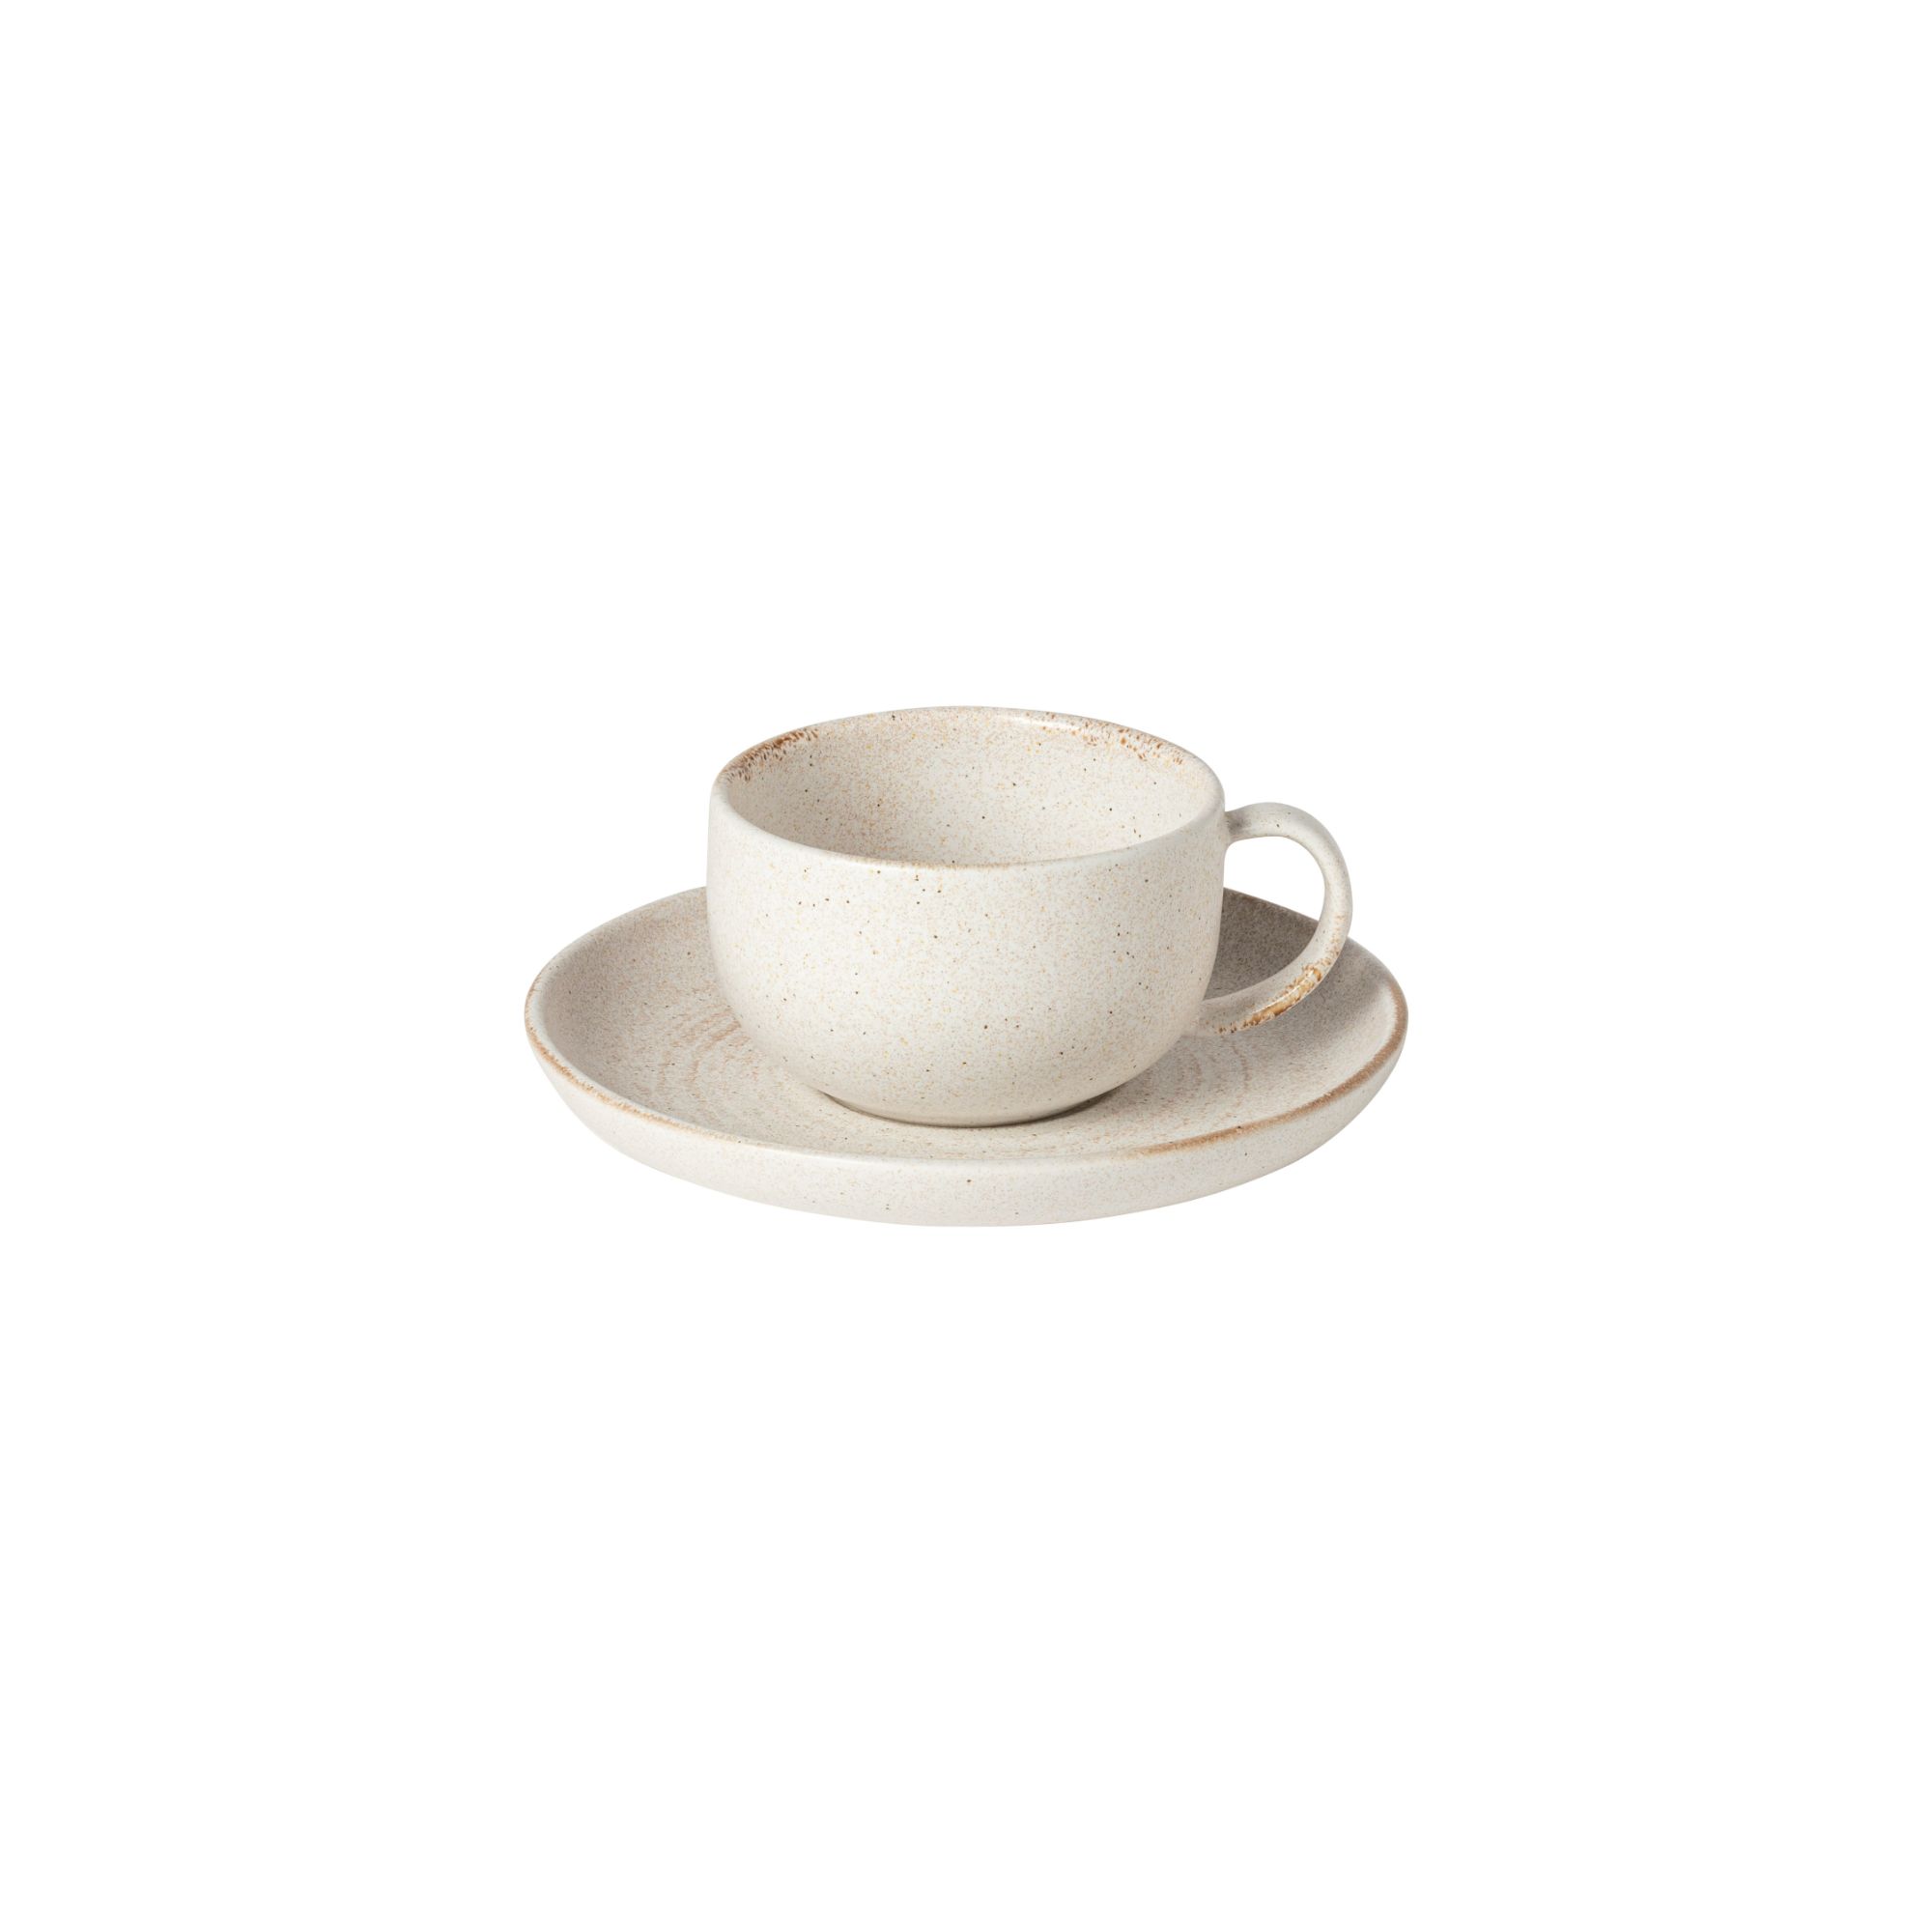 Vermont Cream Tea Cup And Saucer 16cm Gift